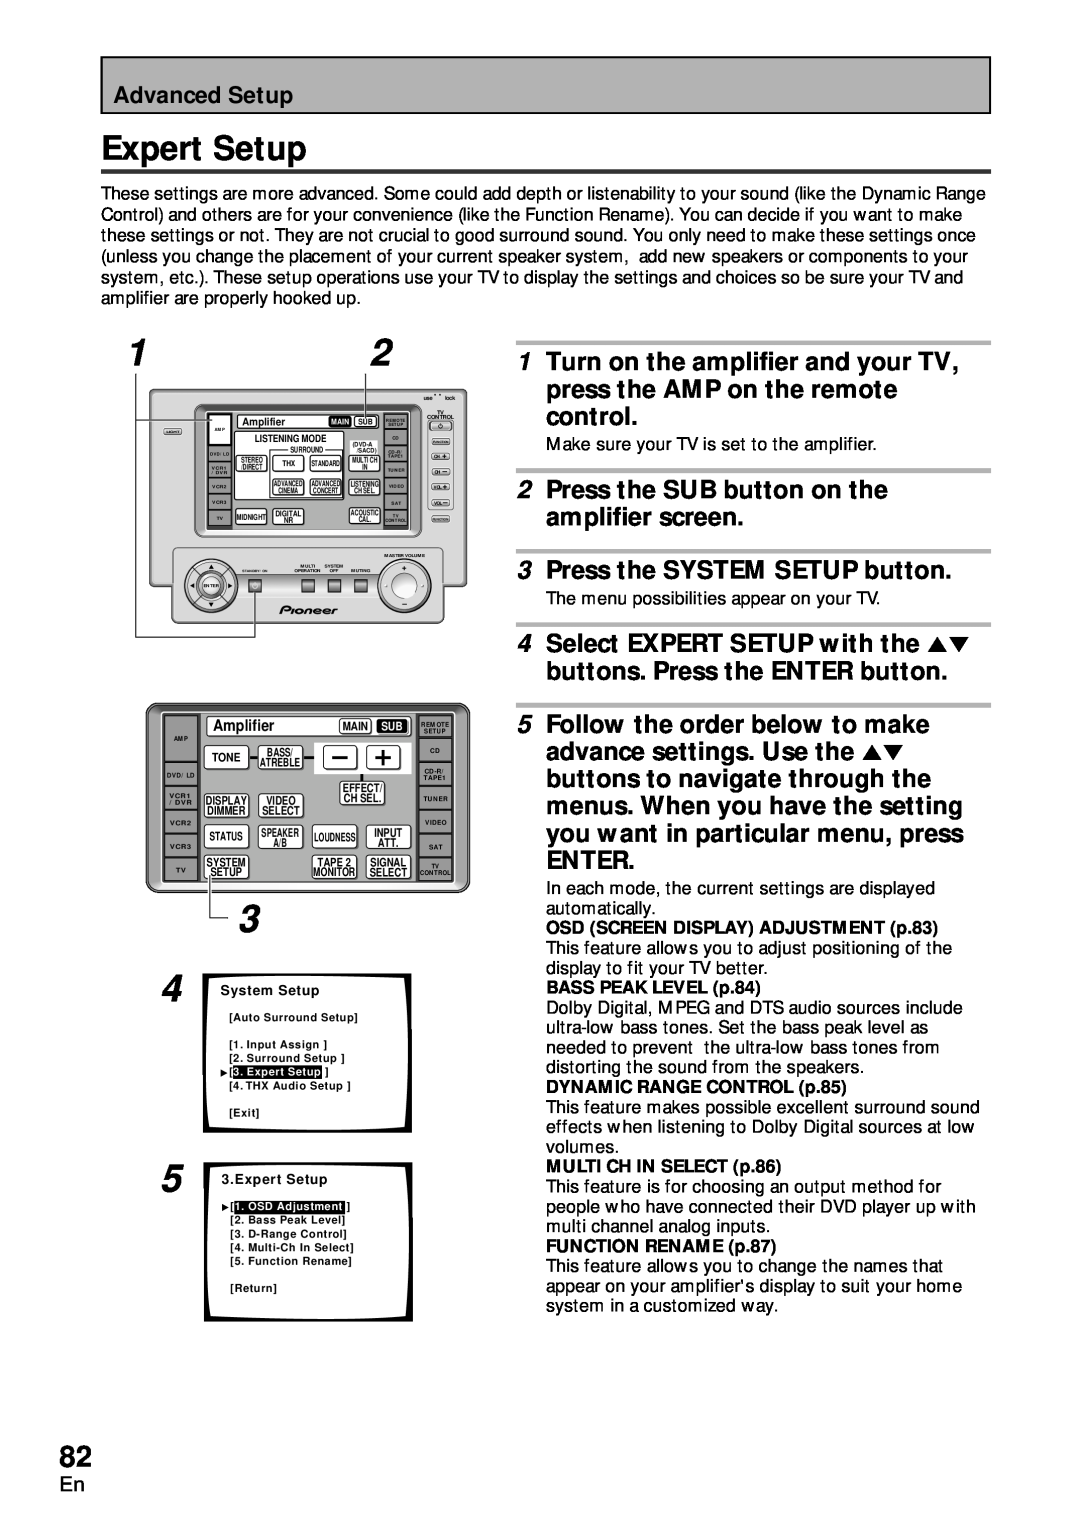 Pioneer VSA-AX10 Expert Setup, control, 2Press the SUB button on the amplifier screen, 3Press the SYSTEM SETUP button 